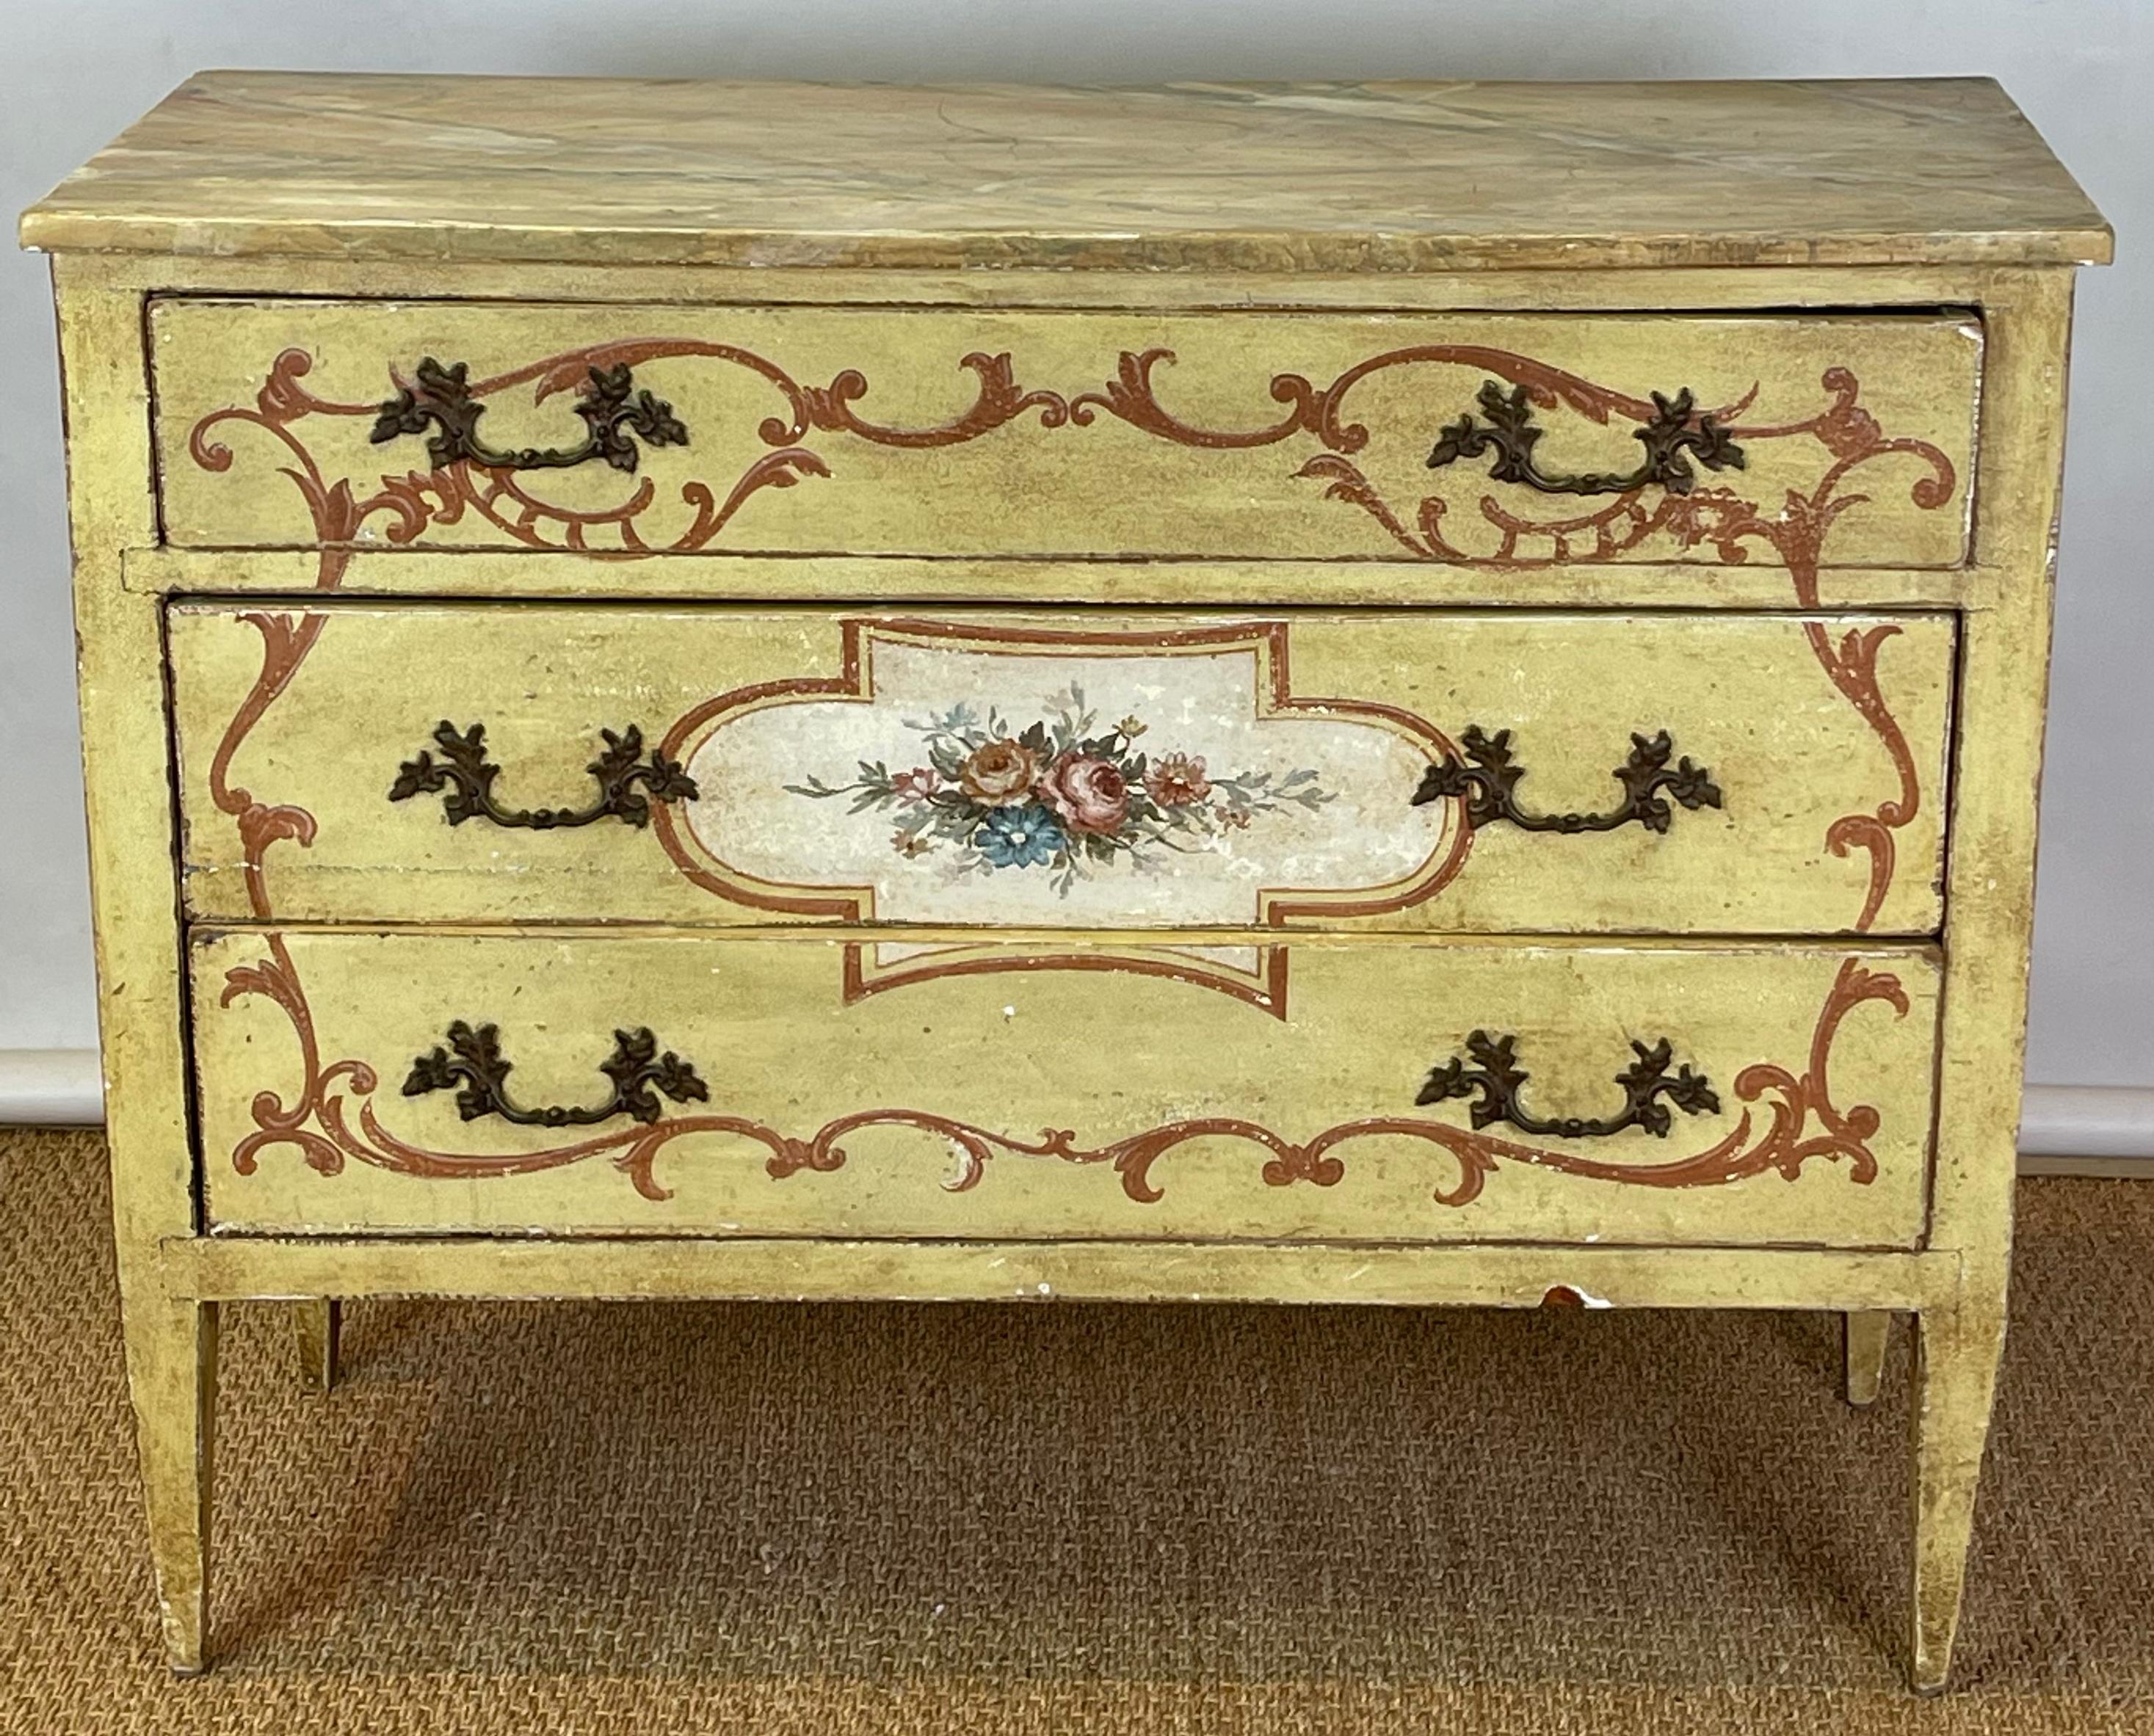 A matched pair of early 19th C. Italian polychrome decorated three-drawer Italian commodes or chests with faux marble tops on square tapering legs.